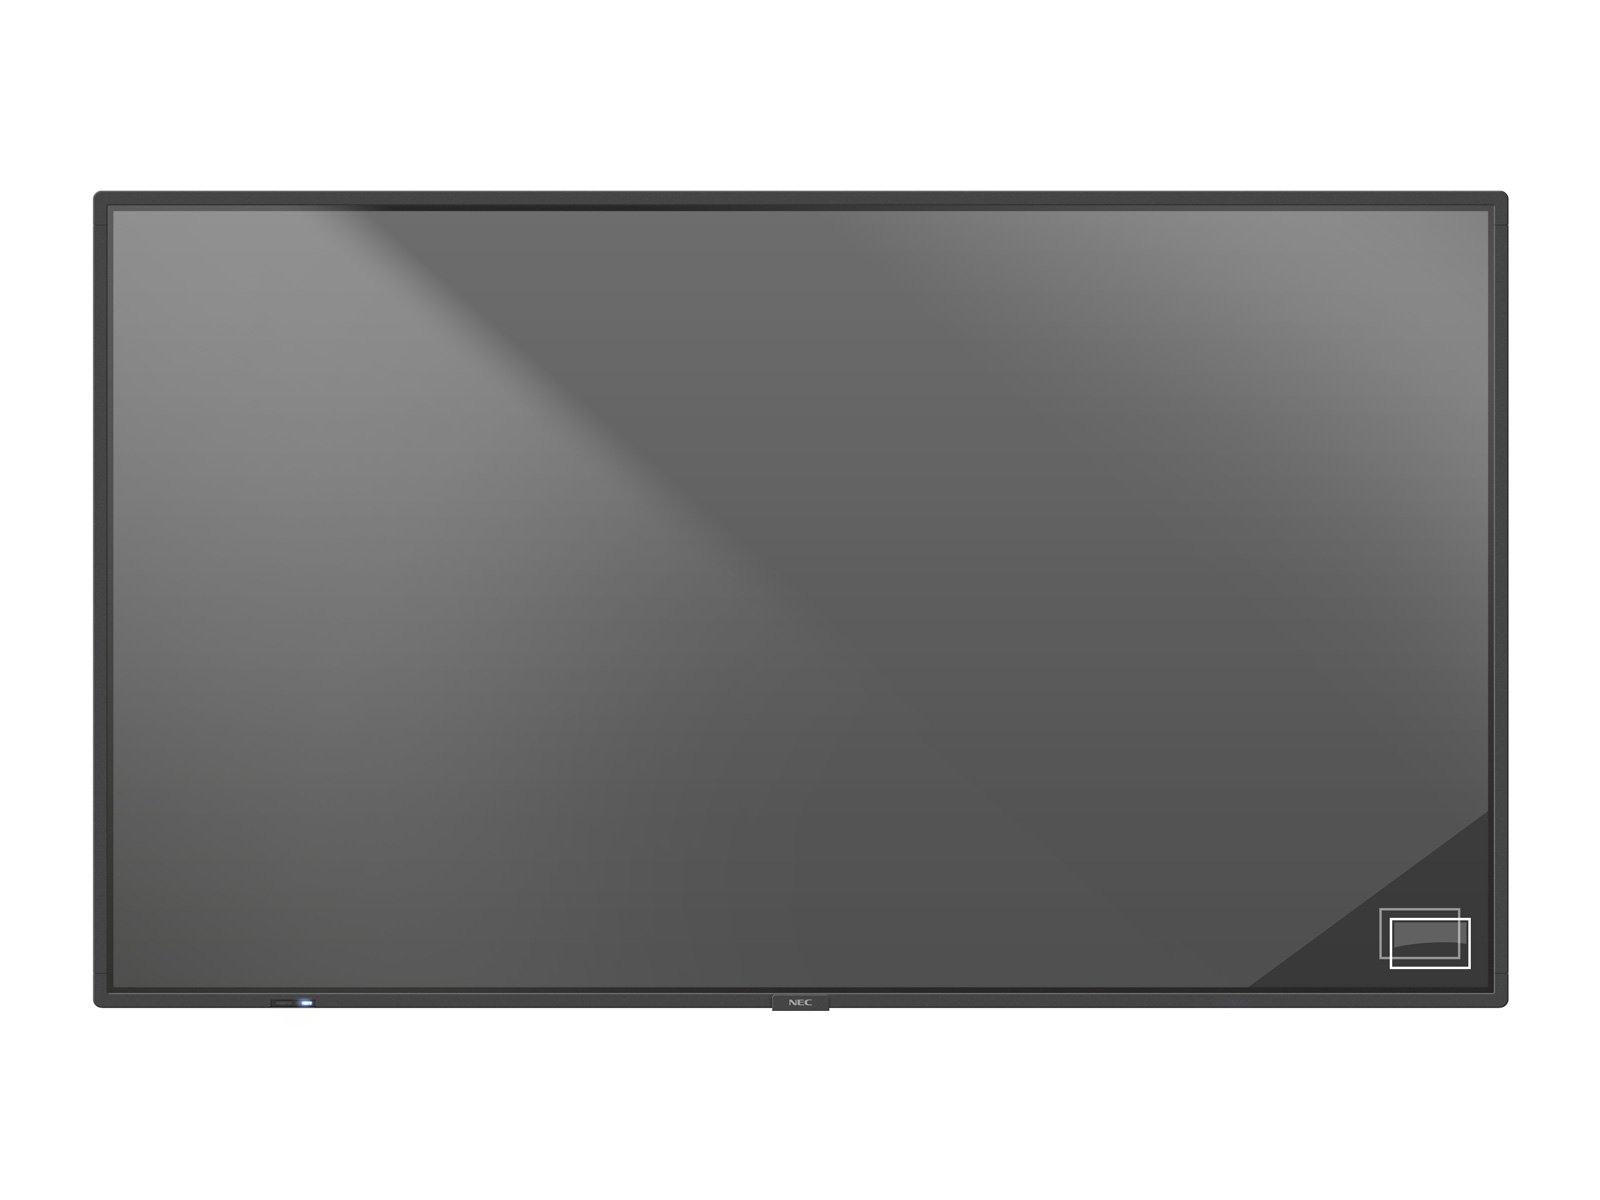 NEC MultiSync MA551 PG - 55 inch - 500 cd/m² - Ultra-HD - 3840x2160 pixel - 24/7 - with protection glass - Large Format Display